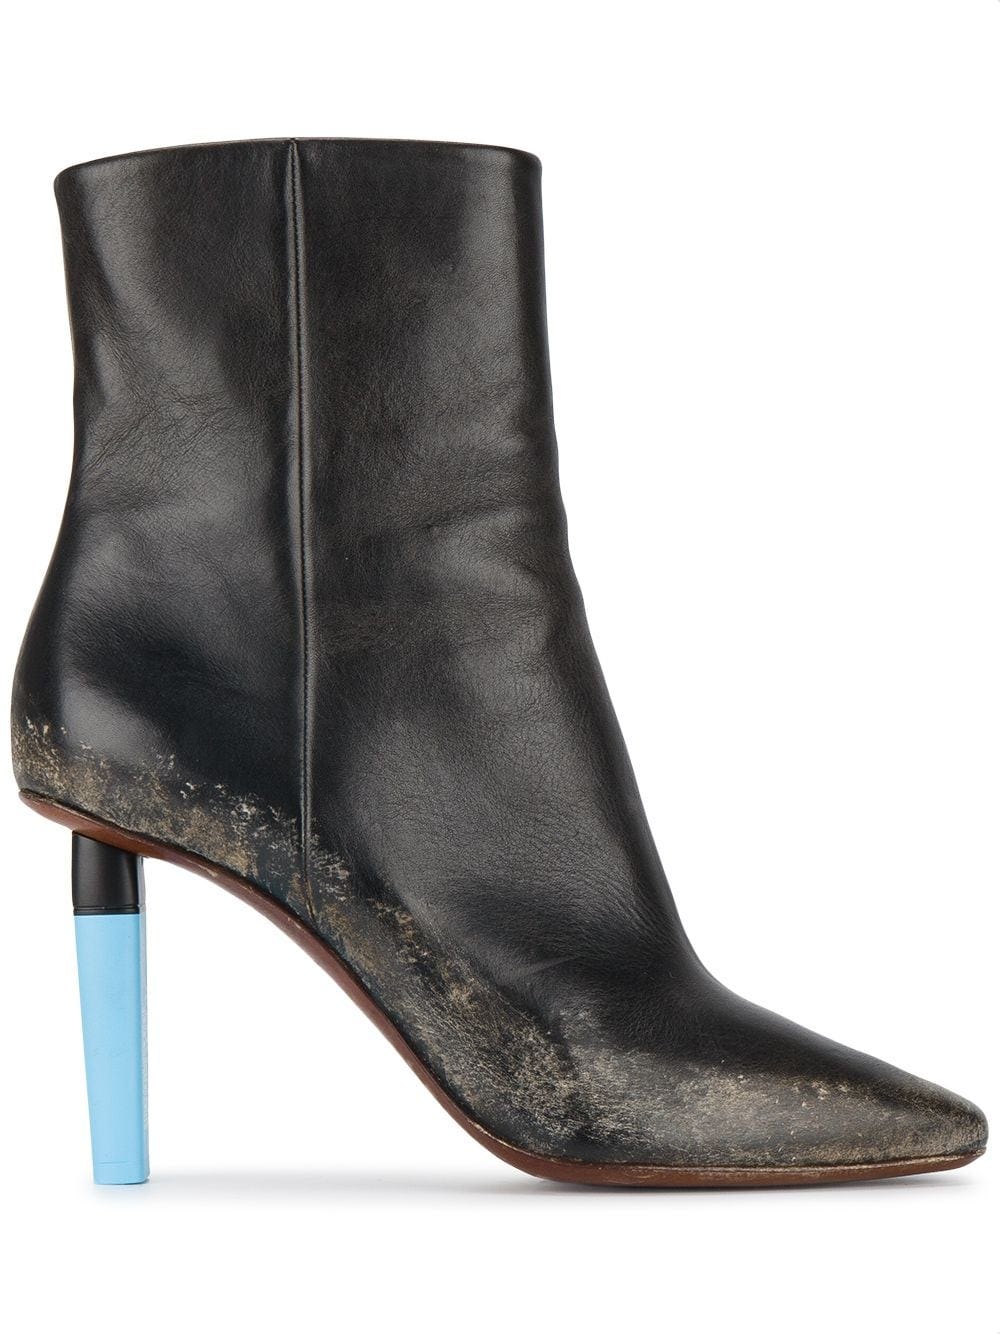 Image 1 of VETEMENTS Gypsy Ankle Boot with Blue Highlighter Heel